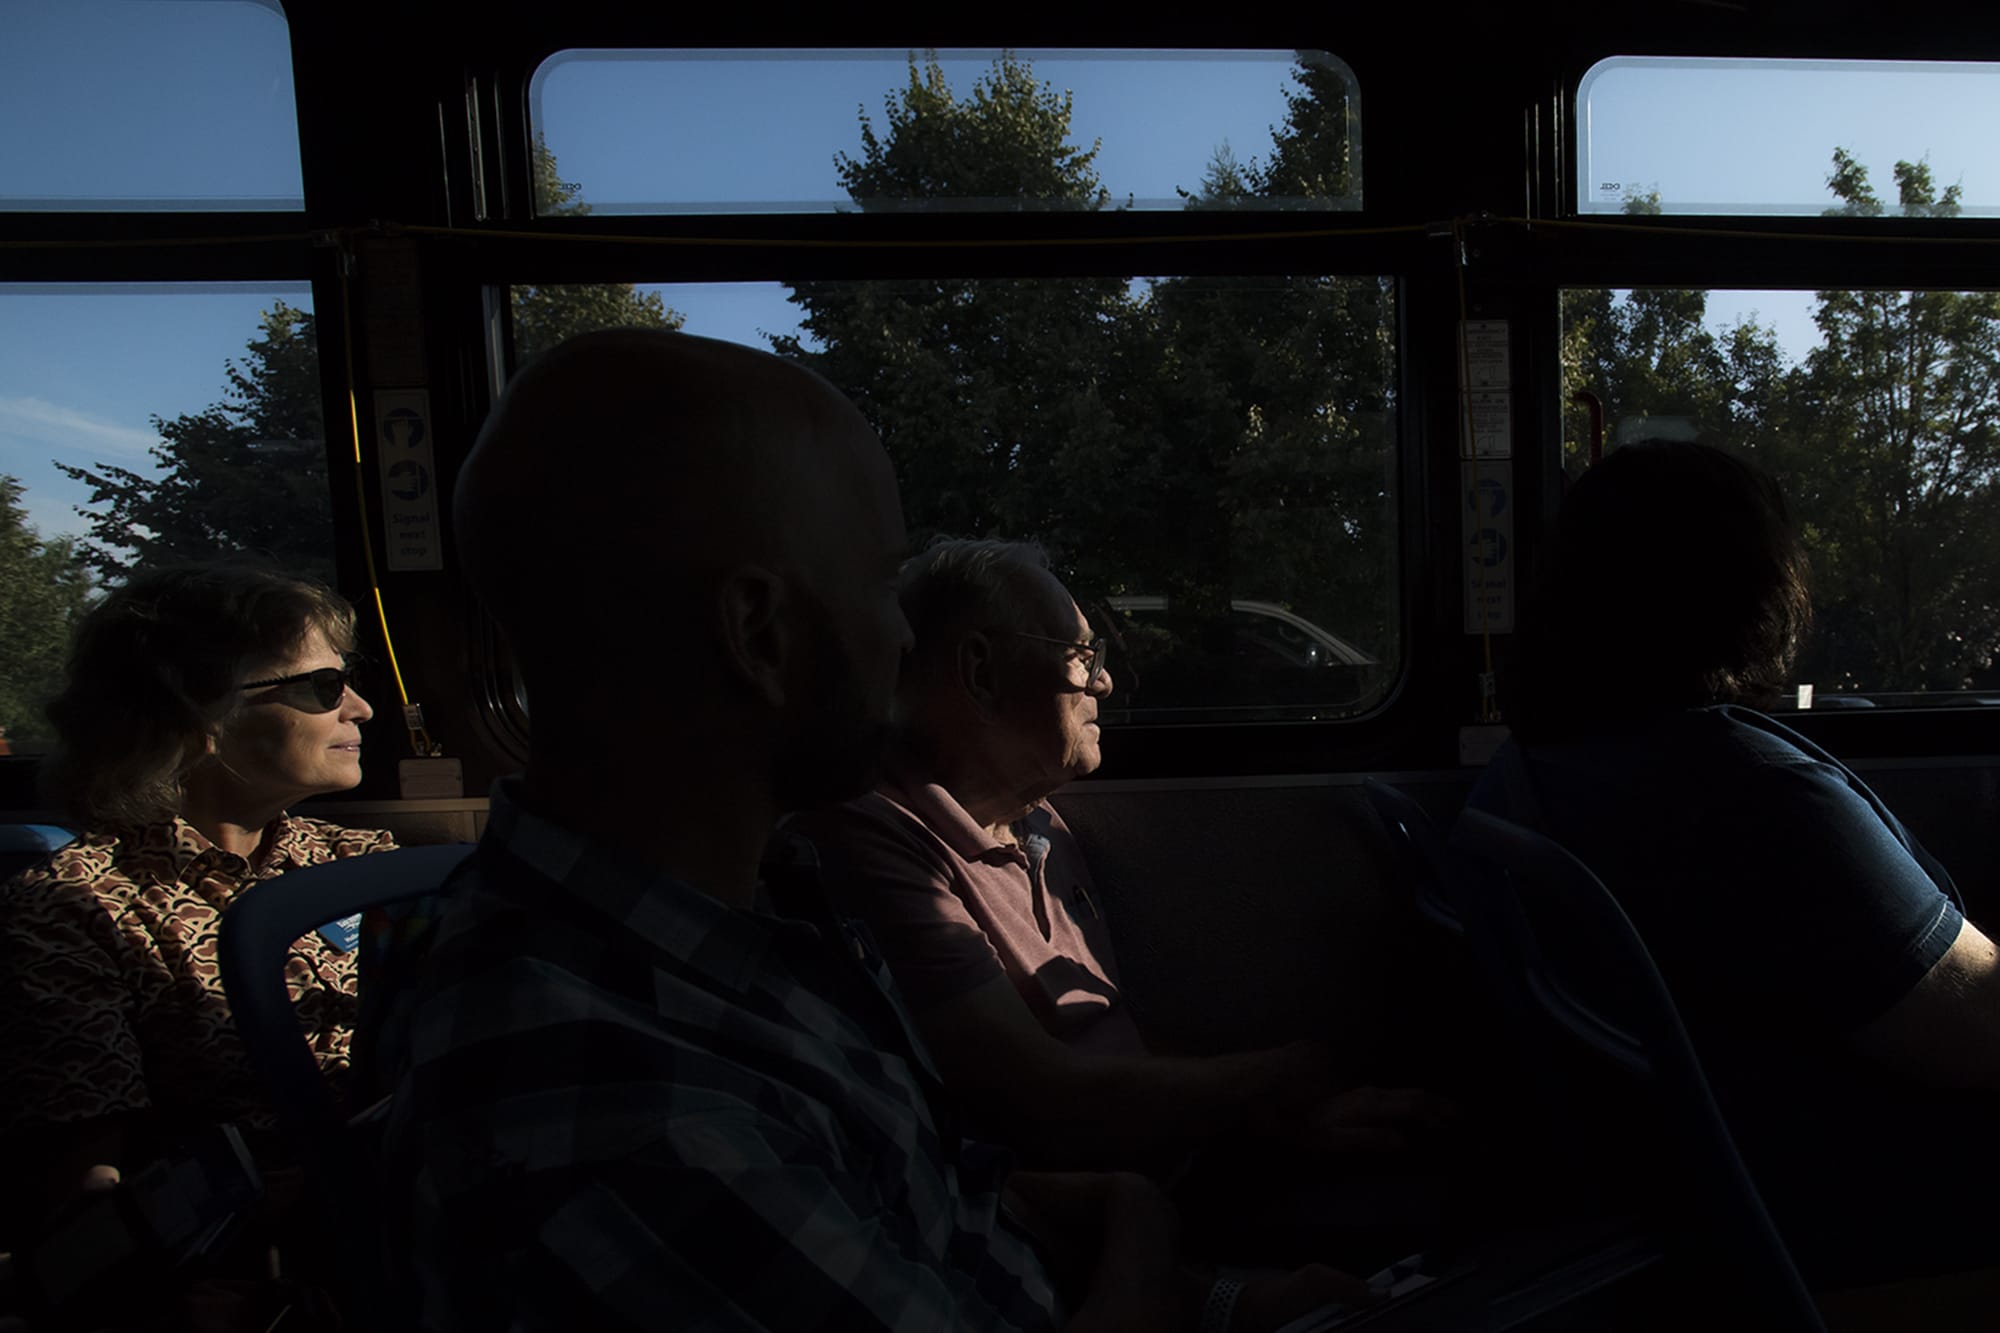 Holly Williams, chair of the Vancouver parks and recreation committee, left, and Paul Lawson, of Vancouver, look out the window of a C-Tran bus during a Vancouver City Council mobile workshop on Monday evening, Aug. 12, 2019.